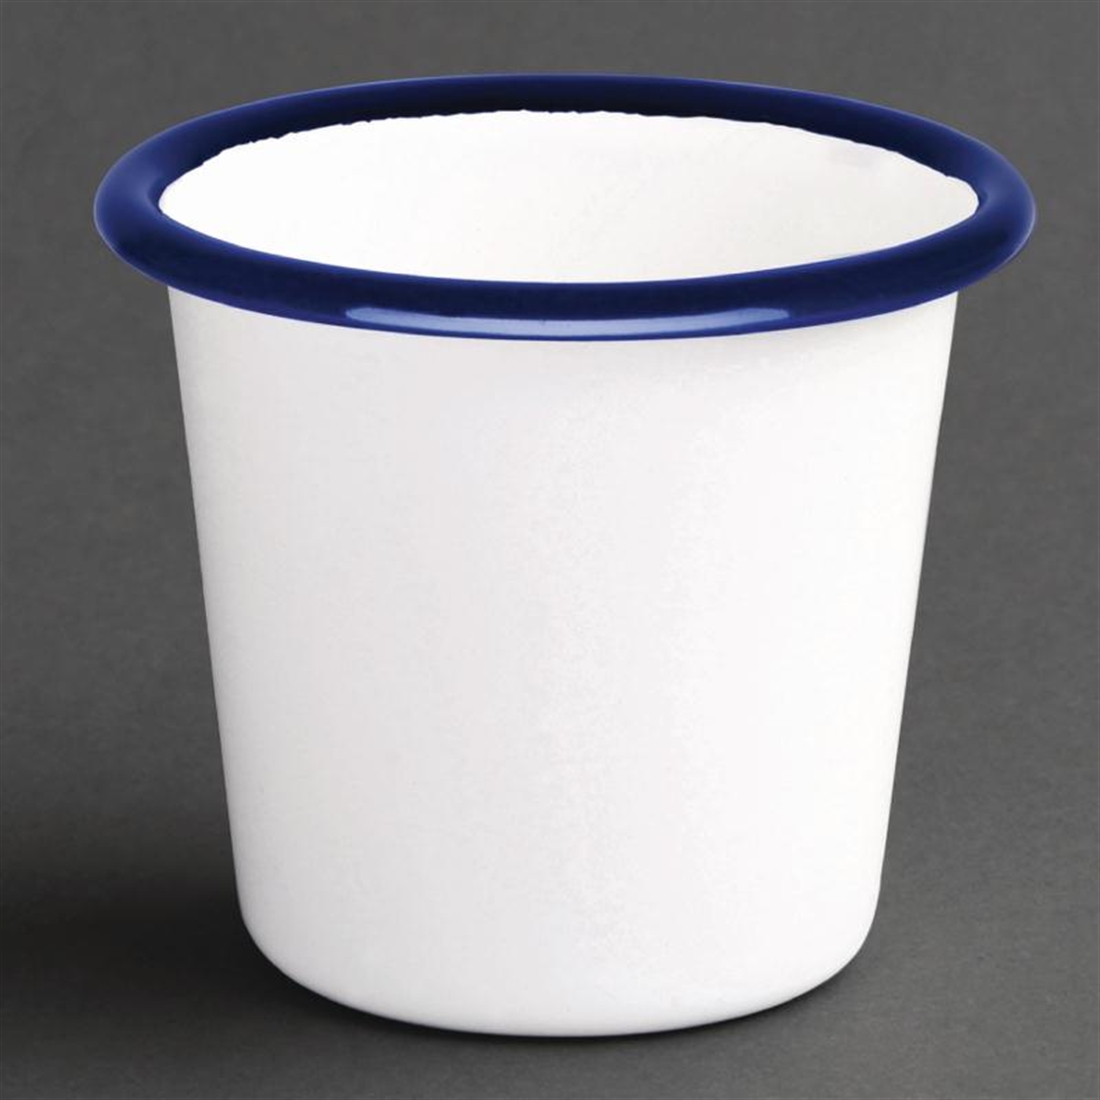 Olympia Enamel Sauce Cup White and Blue